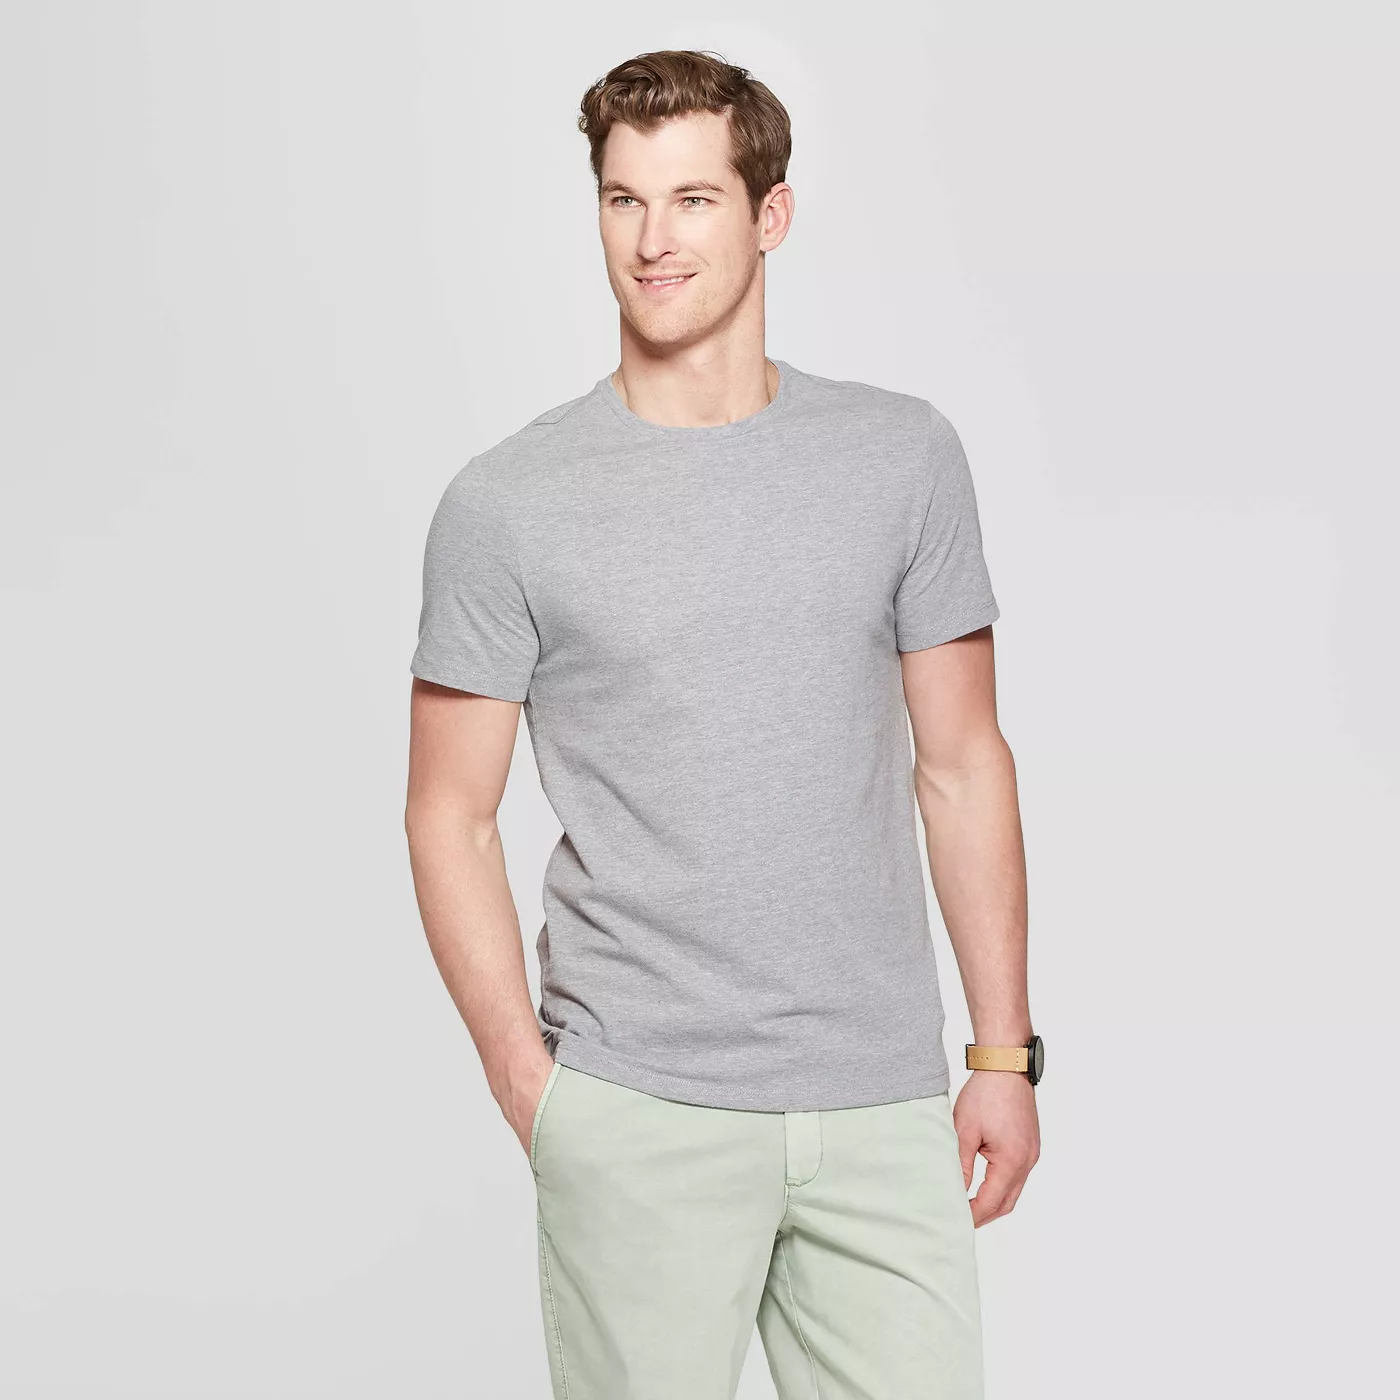 Men's outfit style photography session Standard Fit Short Sleeve Lyndale Crew Neck T-Shirt - Goodfellow & Co